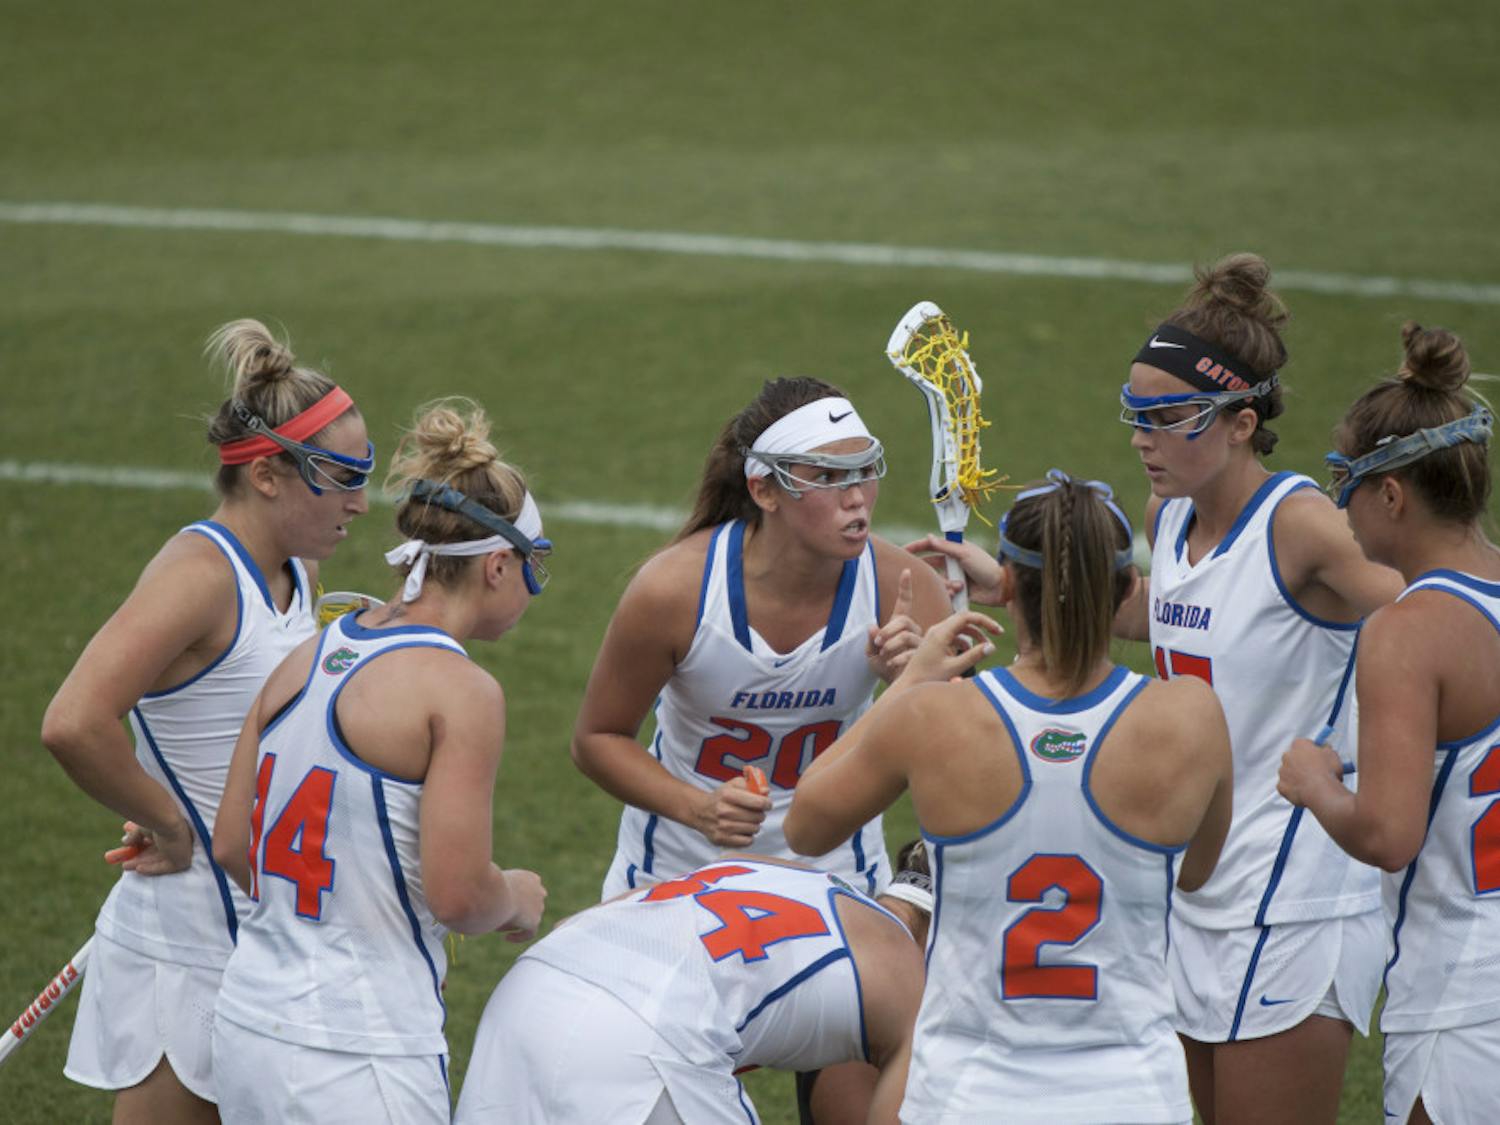 Florida's lacrosse team huddles together during its 15-8 win against Denver on March 25, 2017, at Donald R. Dizney Stadium.